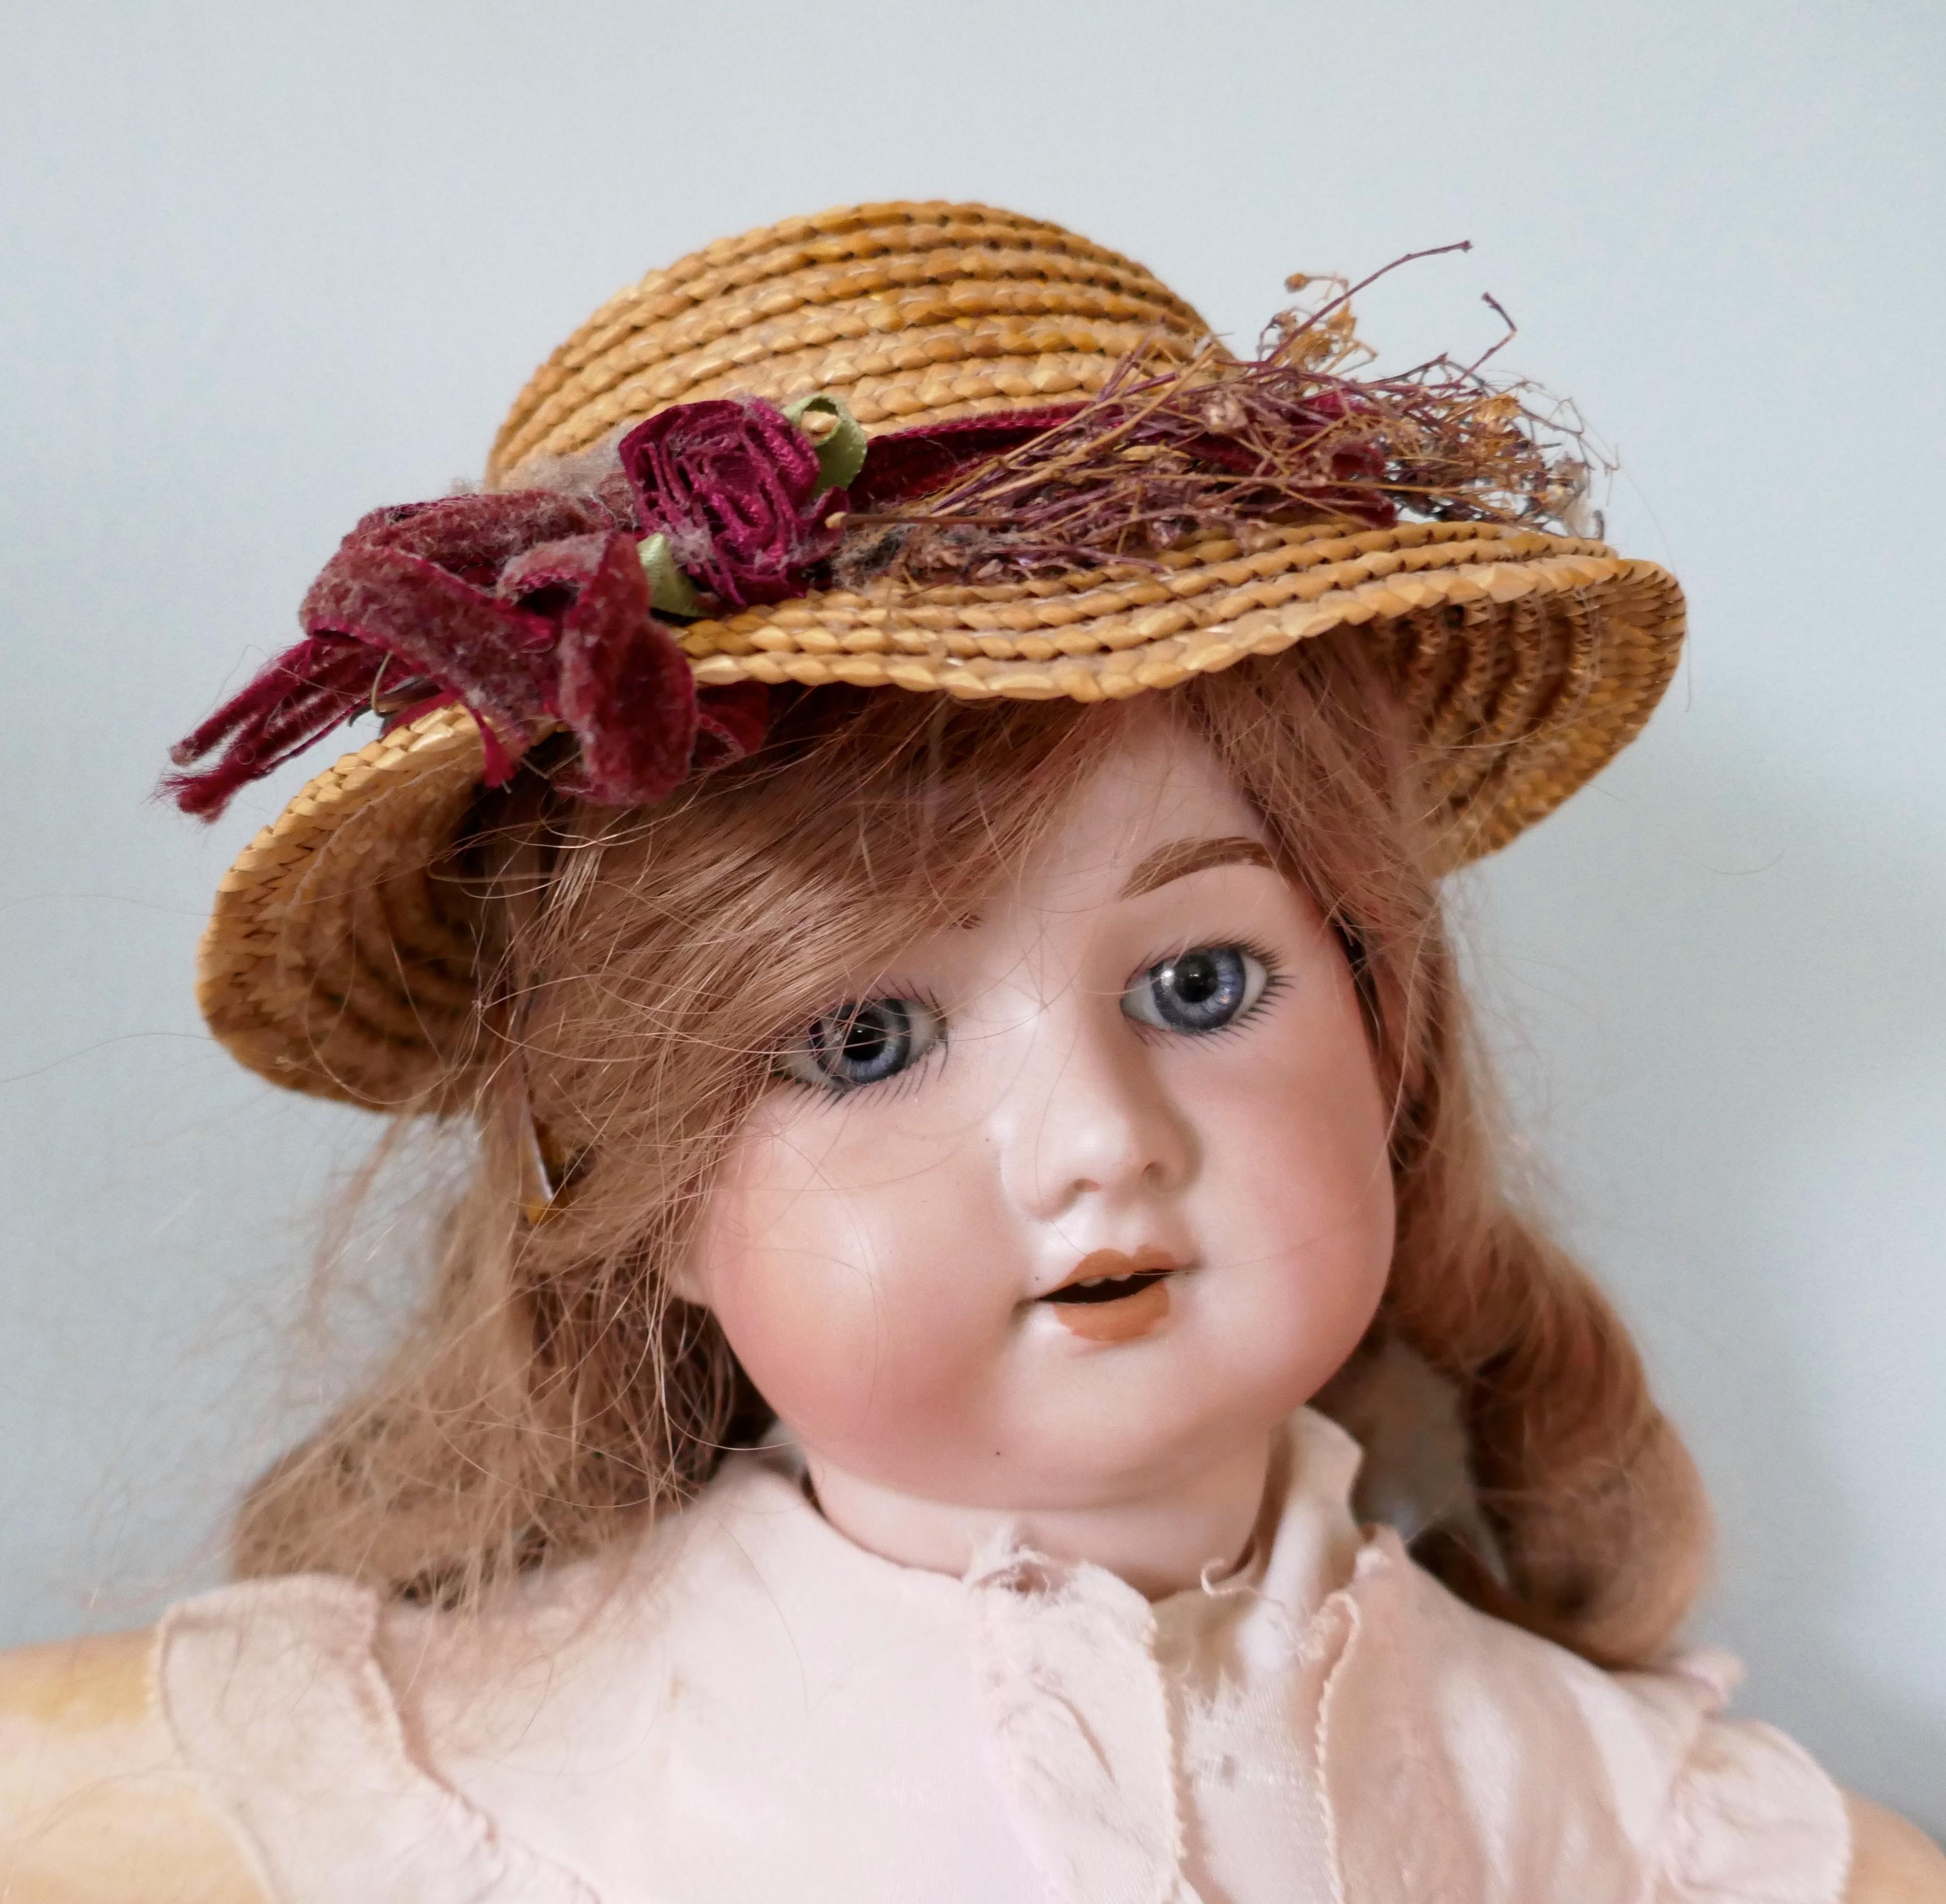 19th century character doll with wig and clothes.


The porcelain head has 5 on the back and has a slope to the open end she has sparkling glass eyes in grey and teeth 
The body is made in composition it has articulated arms and legs, with